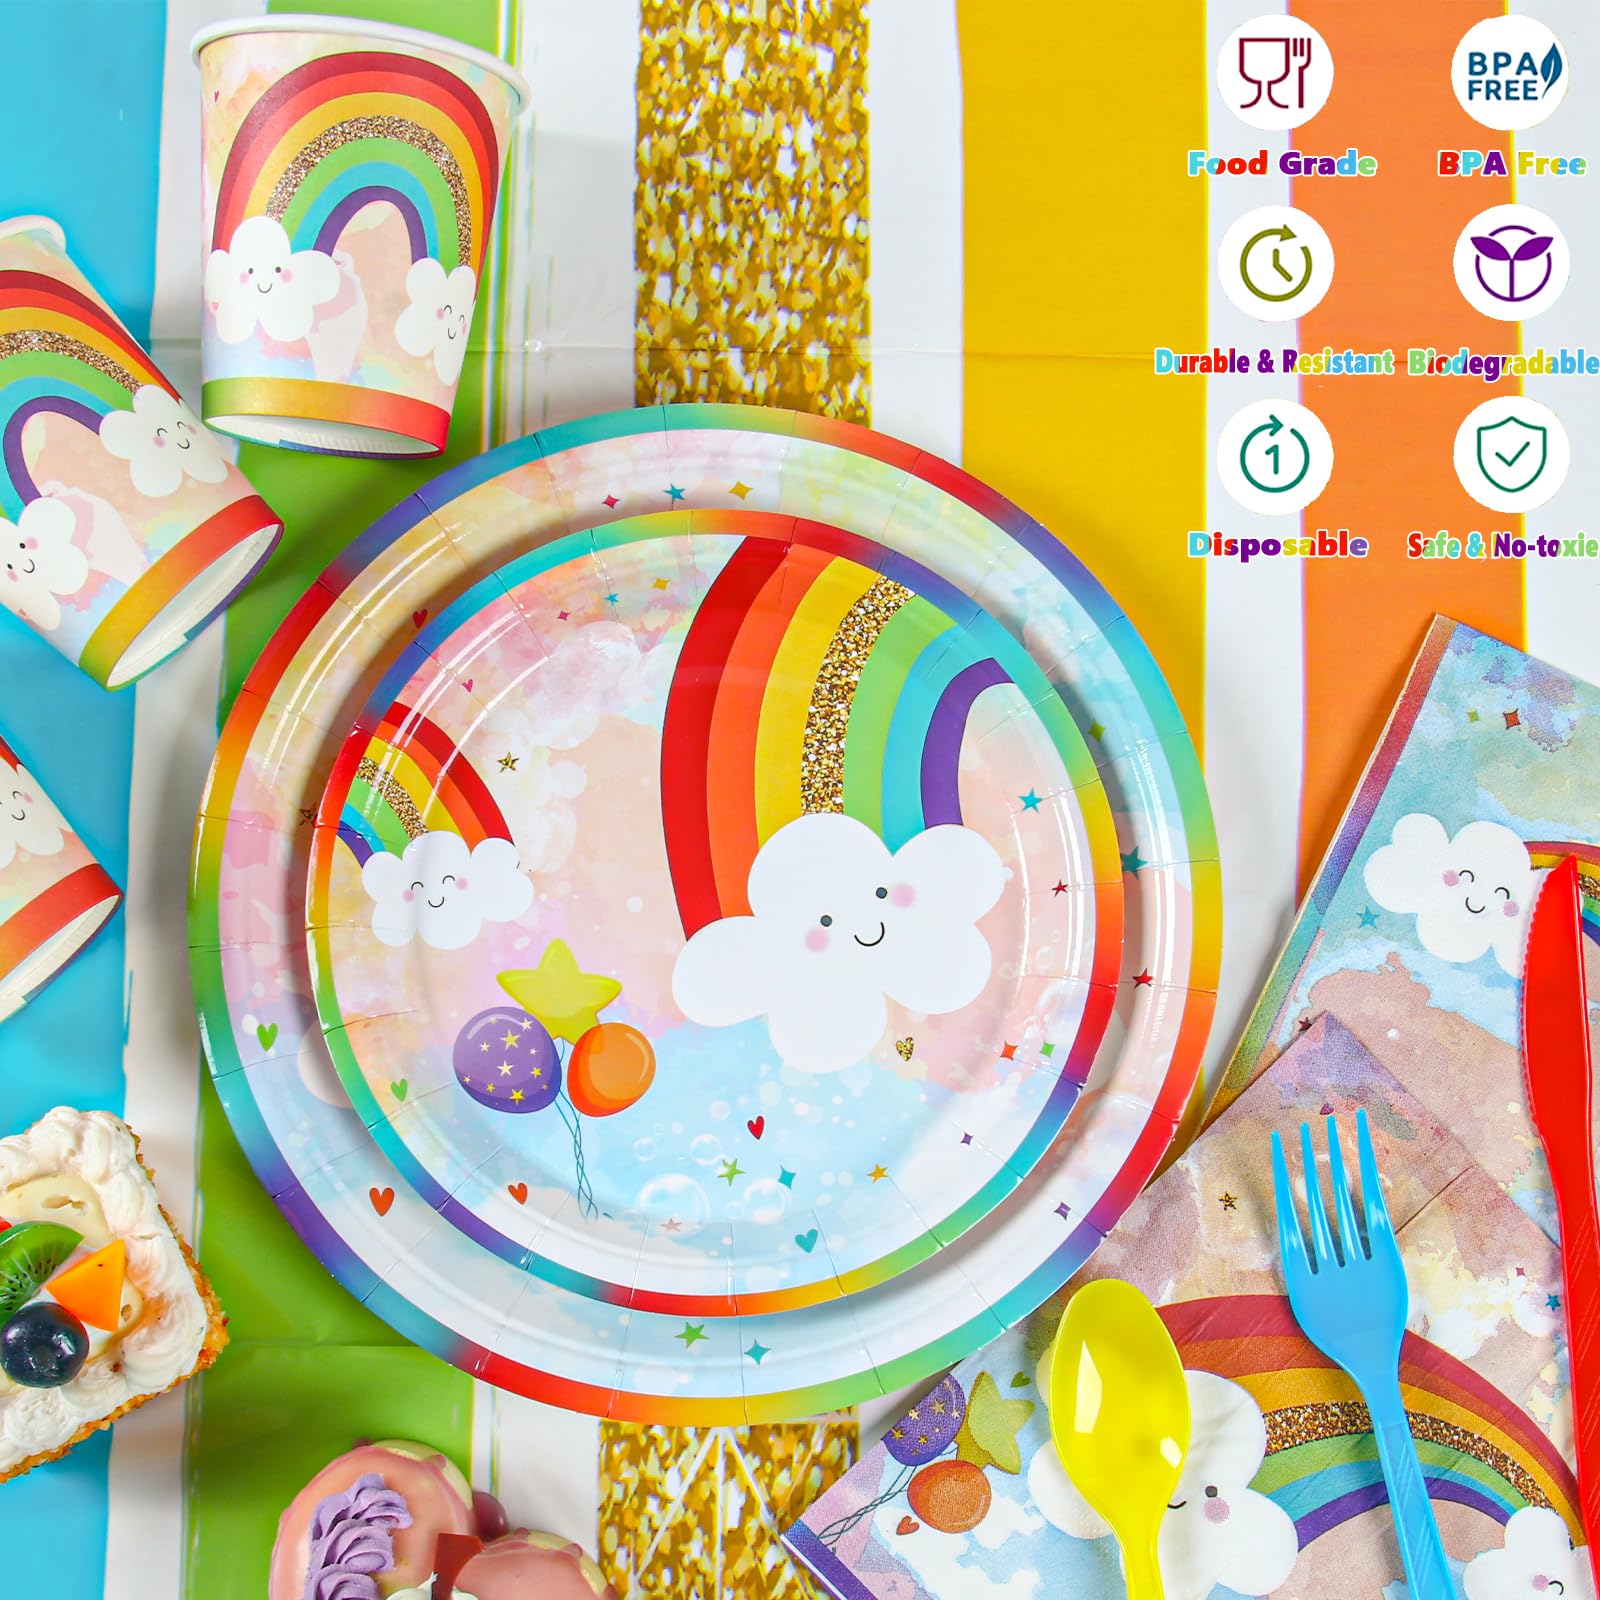 Rainbow Party Supplies, Happy Birthday Decorations for Girls & Boys -169pcs Rainbow Party Tableware Set Include 9" and 7" Party Plates and Napkins Cups Utensils with Tablecloth for 24 Guests